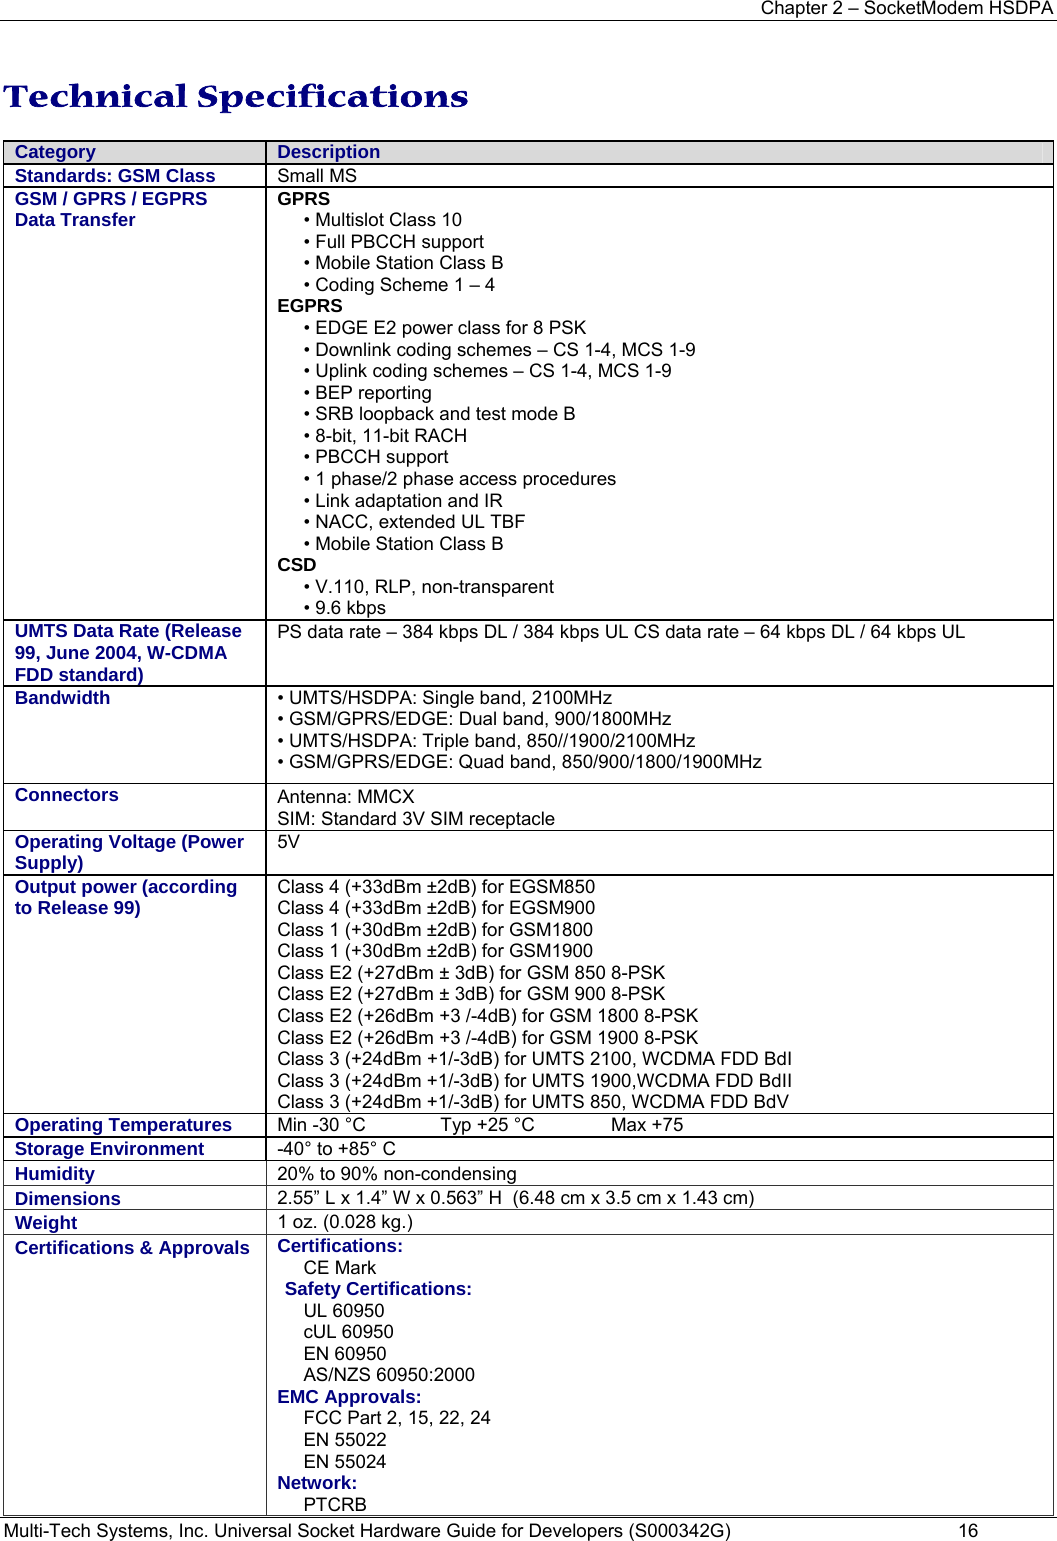 Chapter 2 – SocketModem HSDPA Multi-Tech Systems, Inc. Universal Socket Hardware Guide for Developers (S000342G)  16  Technical Specifications Category  Description Standards: GSM Class   Small MS  GSM / GPRS / EGPRS  Data Transfer  GPRS • Multislot Class 10  • Full PBCCH support  • Mobile Station Class B  • Coding Scheme 1 – 4  EGPRS  • EDGE E2 power class for 8 PSK  • Downlink coding schemes – CS 1-4, MCS 1-9  • Uplink coding schemes – CS 1-4, MCS 1-9  • BEP reporting  • SRB loopback and test mode B  • 8-bit, 11-bit RACH  • PBCCH support  • 1 phase/2 phase access procedures  • Link adaptation and IR  • NACC, extended UL TBF  • Mobile Station Class B  CSD  • V.110, RLP, non-transparent  • 9.6 kbps  UMTS Data Rate (Release 99, June 2004, W-CDMA FDD standard)  PS data rate – 384 kbps DL / 384 kbps UL CS data rate – 64 kbps DL / 64 kbps UL  Bandwidth   • UMTS/HSDPA: Single band, 2100MHz  • GSM/GPRS/EDGE: Dual band, 900/1800MHz  • UMTS/HSDPA: Triple band, 850//1900/2100MHz  • GSM/GPRS/EDGE: Quad band, 850/900/1800/1900MHz  Connectors  Antenna: MMCX SIM: Standard 3V SIM receptacle Operating Voltage (Power Supply)   5V  Output power (according to Release 99)   Class 4 (+33dBm ±2dB) for EGSM850  Class 4 (+33dBm ±2dB) for EGSM900  Class 1 (+30dBm ±2dB) for GSM1800  Class 1 (+30dBm ±2dB) for GSM1900  Class E2 (+27dBm ± 3dB) for GSM 850 8-PSK  Class E2 (+27dBm ± 3dB) for GSM 900 8-PSK  Class E2 (+26dBm +3 /-4dB) for GSM 1800 8-PSK  Class E2 (+26dBm +3 /-4dB) for GSM 1900 8-PSK  Class 3 (+24dBm +1/-3dB) for UMTS 2100, WCDMA FDD BdI  Class 3 (+24dBm +1/-3dB) for UMTS 1900,WCDMA FDD BdII  Class 3 (+24dBm +1/-3dB) for UMTS 850, WCDMA FDD BdV  Operating Temperatures  Min -30 °C  Typ +25 °C  Max +75  Storage Environment  -40° to +85° C Humidity  20% to 90% non-condensing  Dimensions  2.55” L x 1.4” W x 0.563” H  (6.48 cm x 3.5 cm x 1.43 cm)  Weight  1 oz. (0.028 kg.)  Certifications &amp; Approvals  Certifications:  CE Mark Safety Certifications: UL 60950 cUL 60950 EN 60950 AS/NZS 60950:2000 EMC Approvals:  FCC Part 2, 15, 22, 24 EN 55022 EN 55024 Network:  PTCRB 